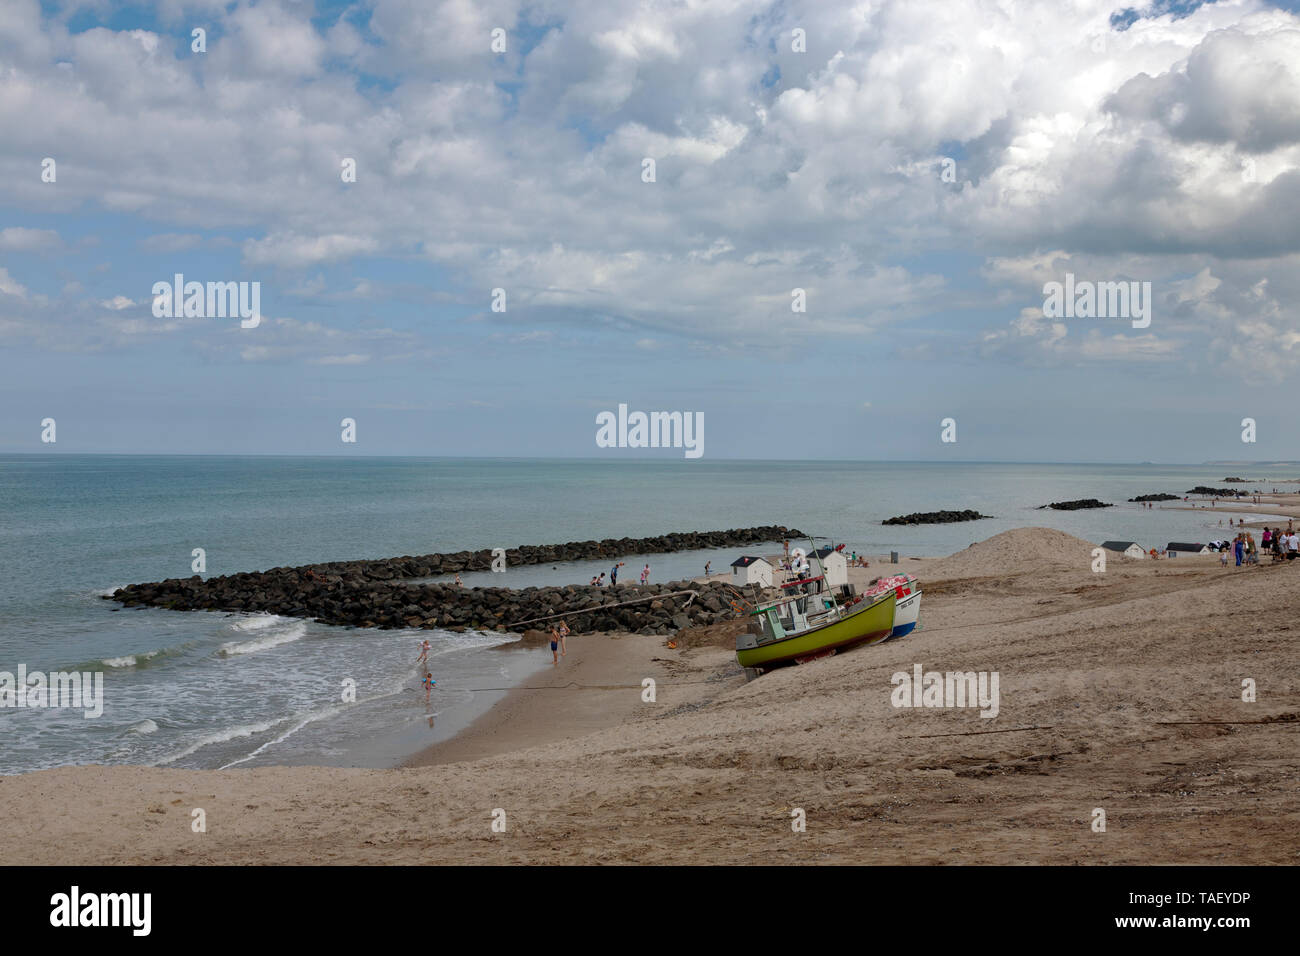 The beach at Lønstrup, Loenstrup,,a popular tourist resort in the north western Jutland, Denmark. Fishing vessels pulled up on the beach. Stock Photo